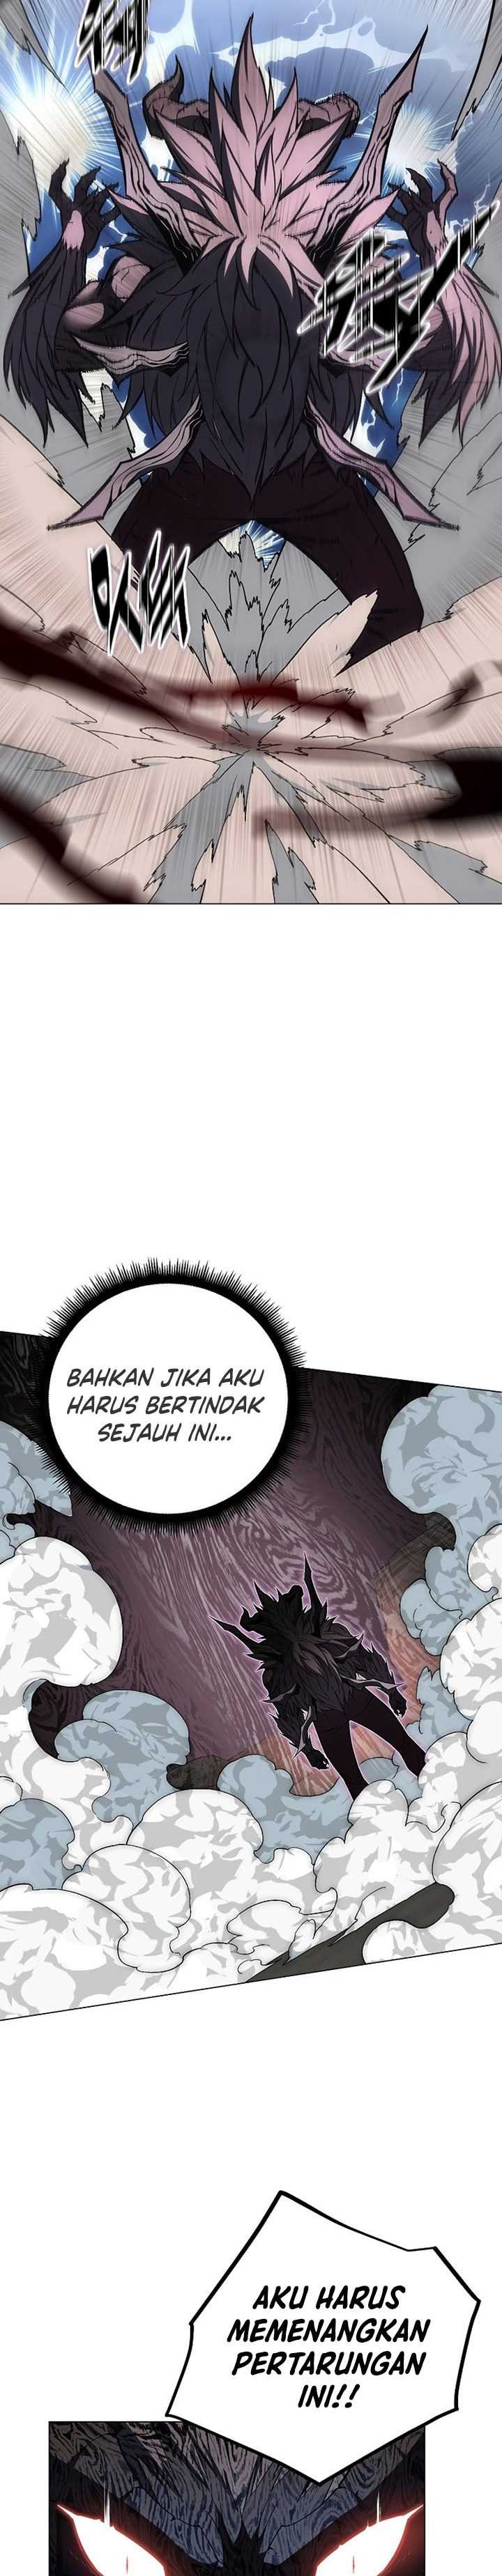 Heavenly Demon Instructor Chapter 59